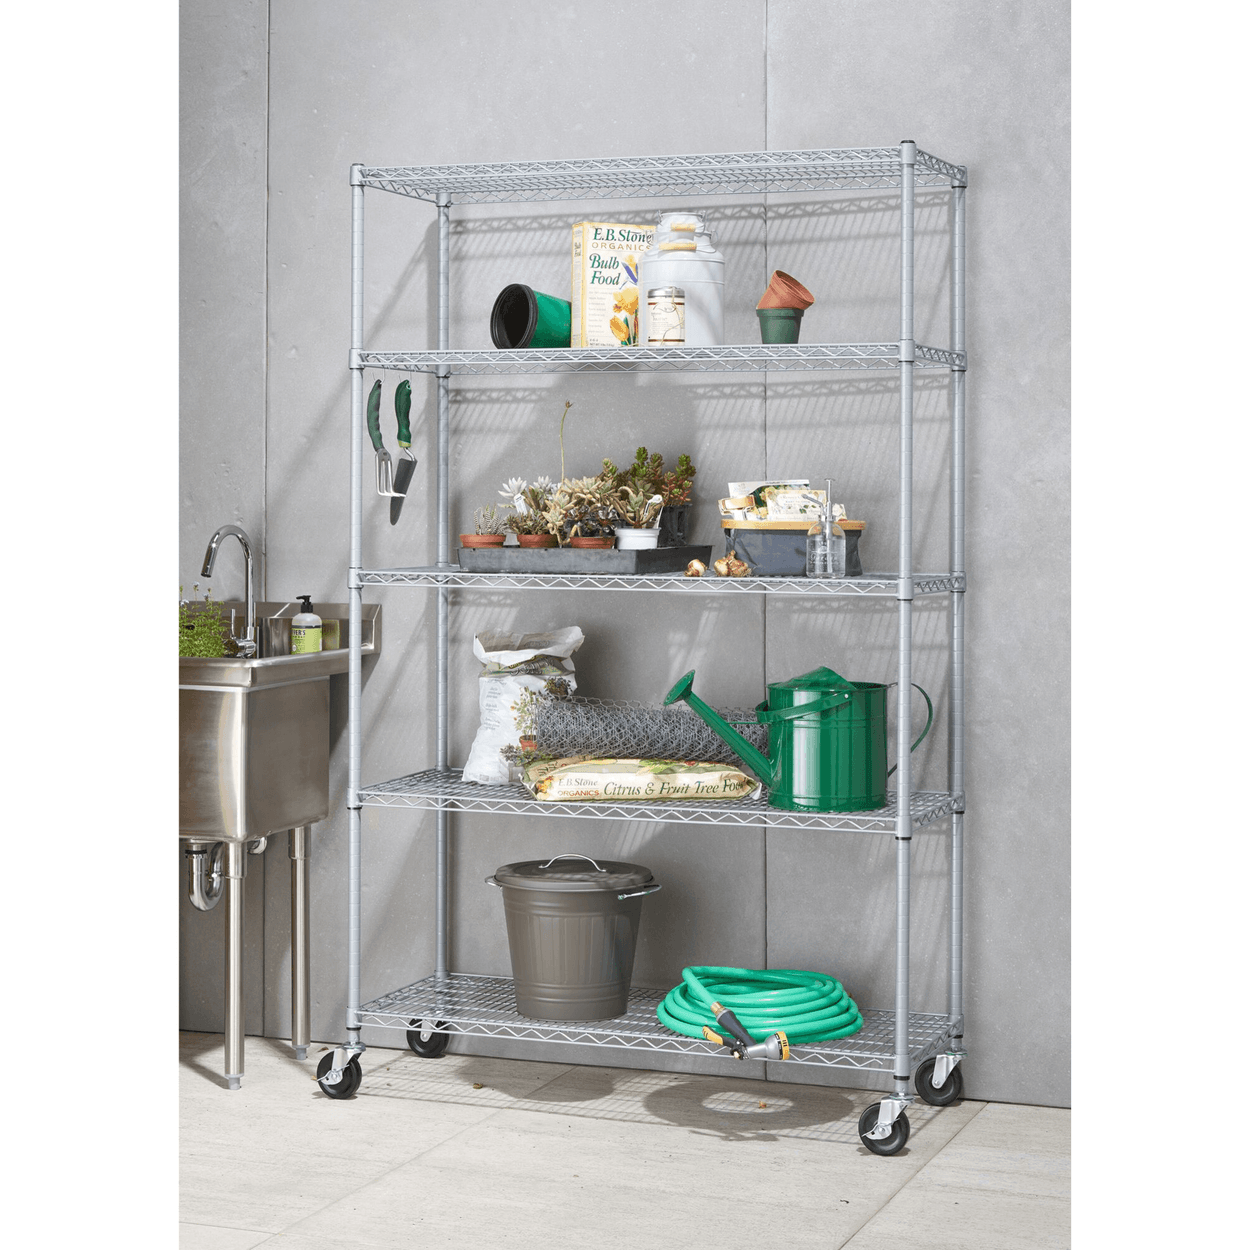 Outdoor Wire Shelving Rack With Wheels, Costco Wire Shelving Units